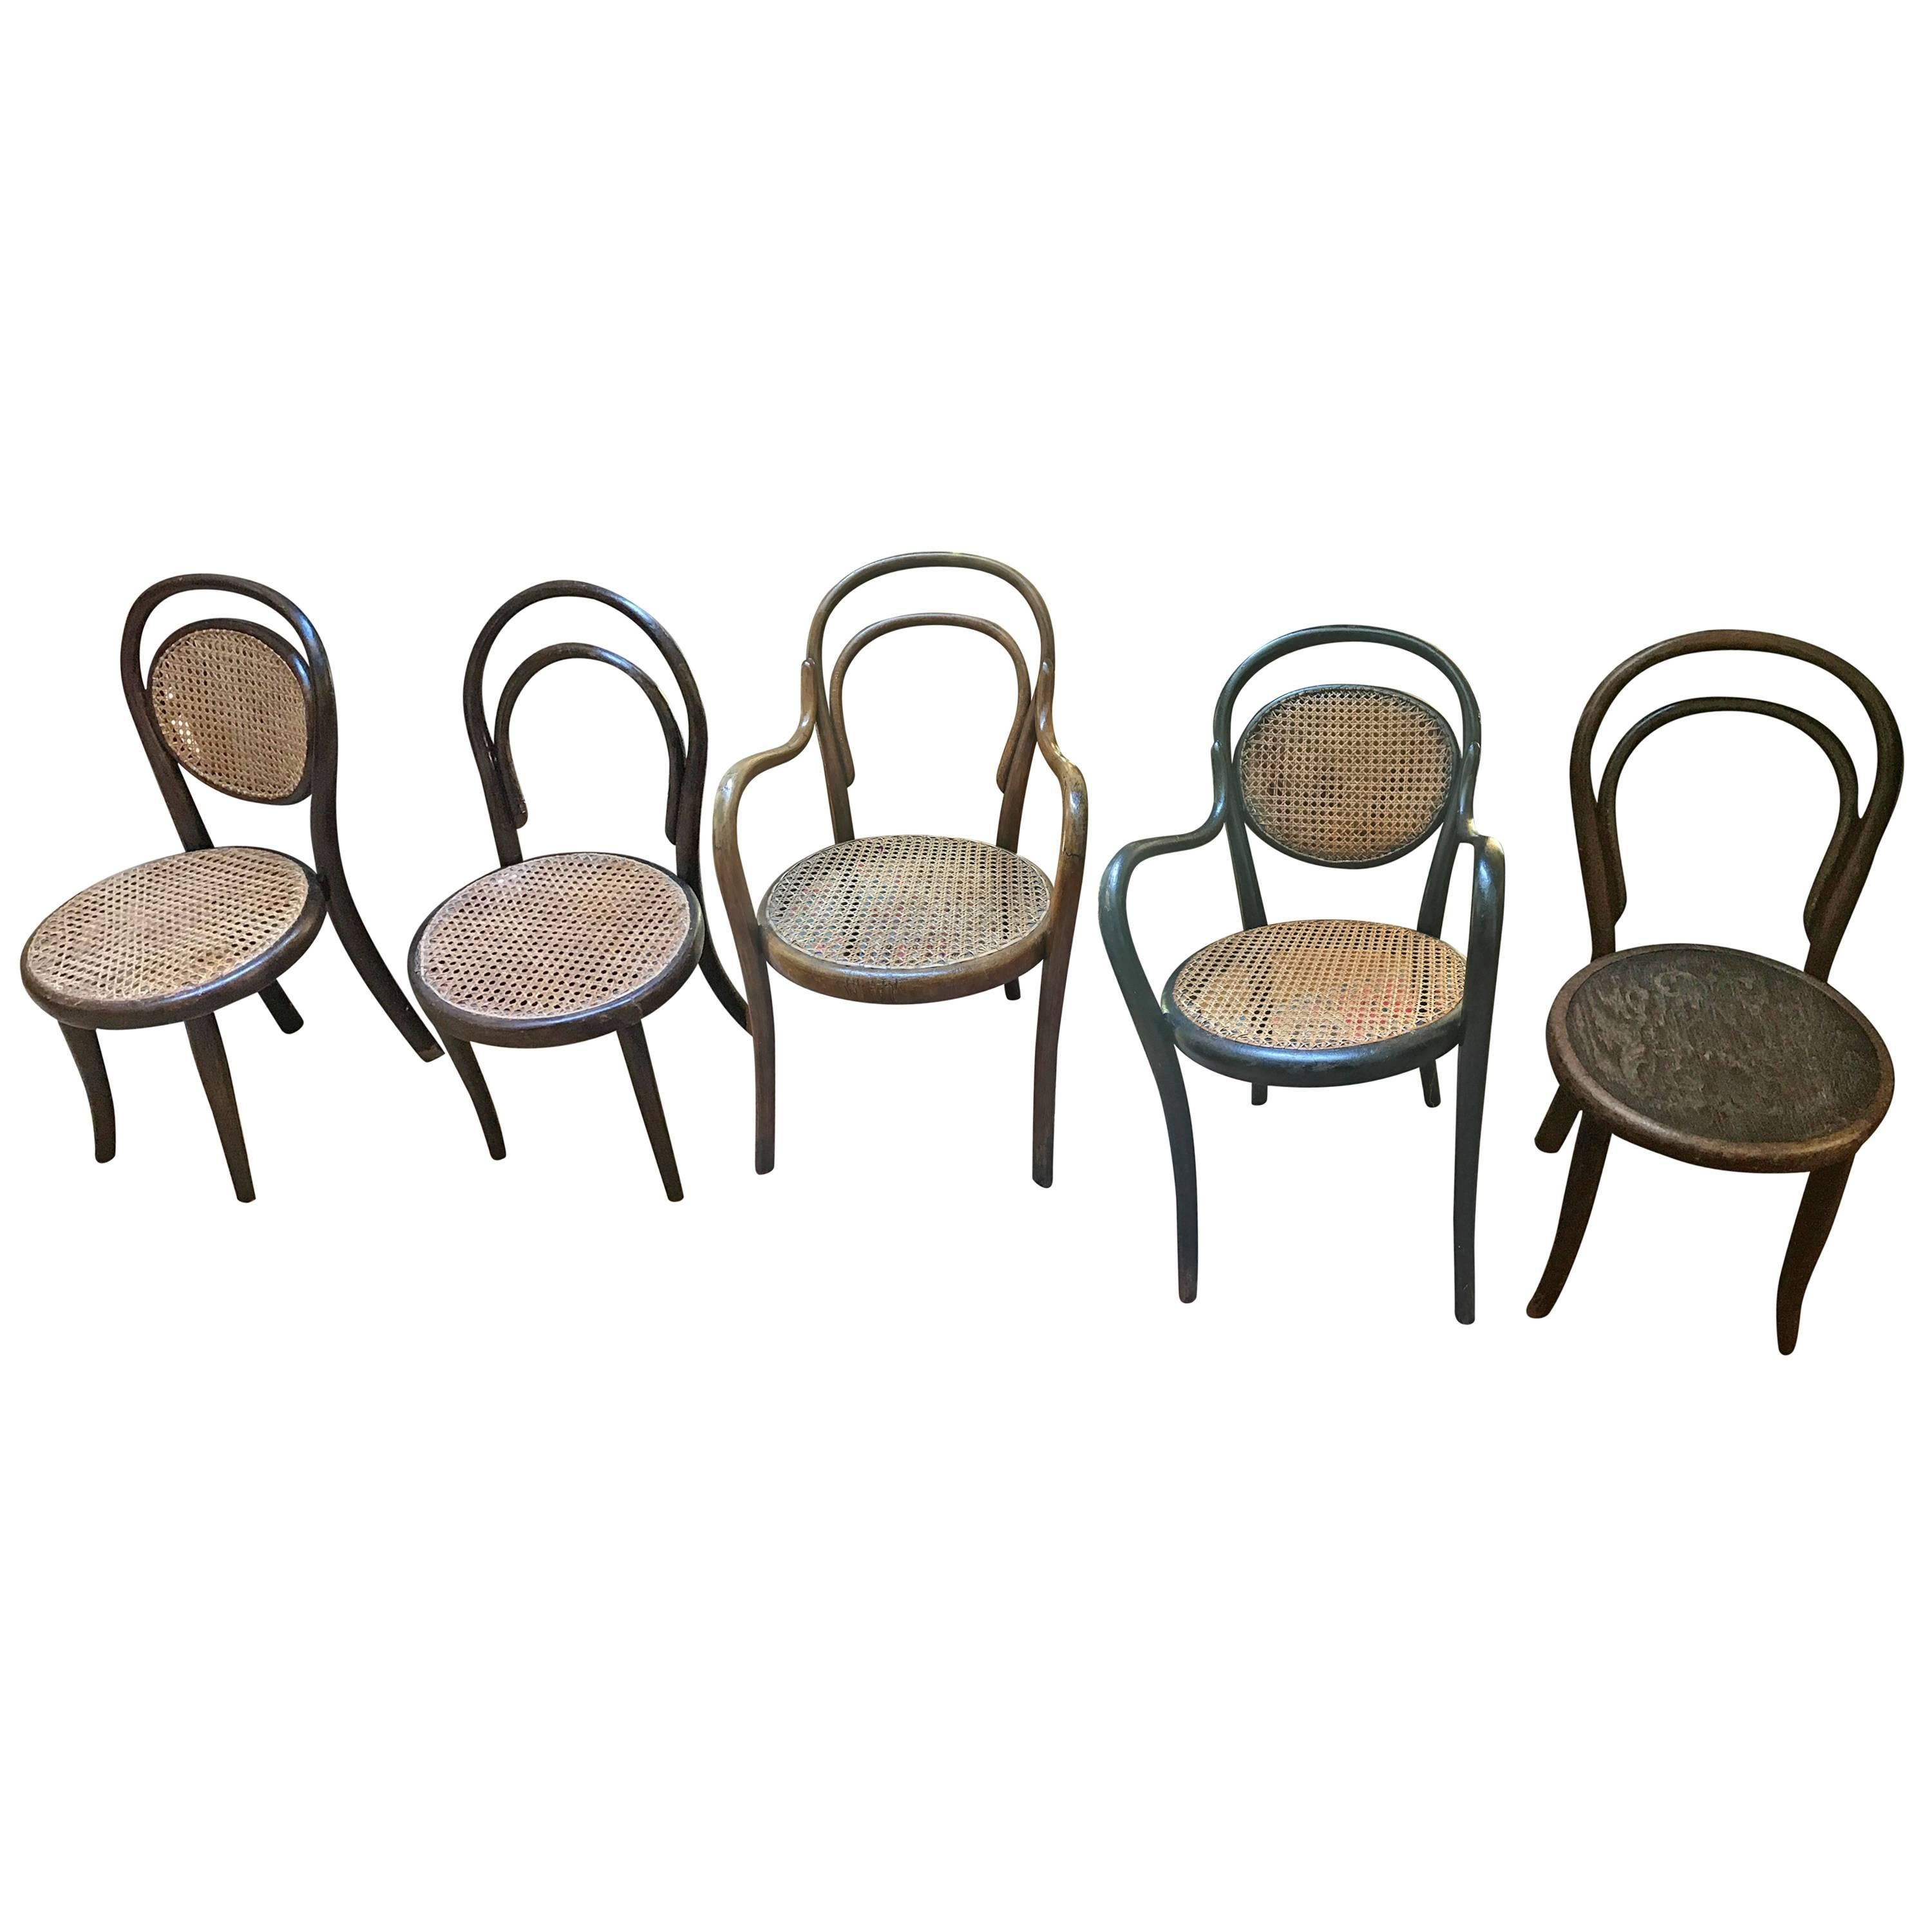 Thonet bentwood Collection of Five different Children's Chairs, 1900 child  For Sale at 1stDibs